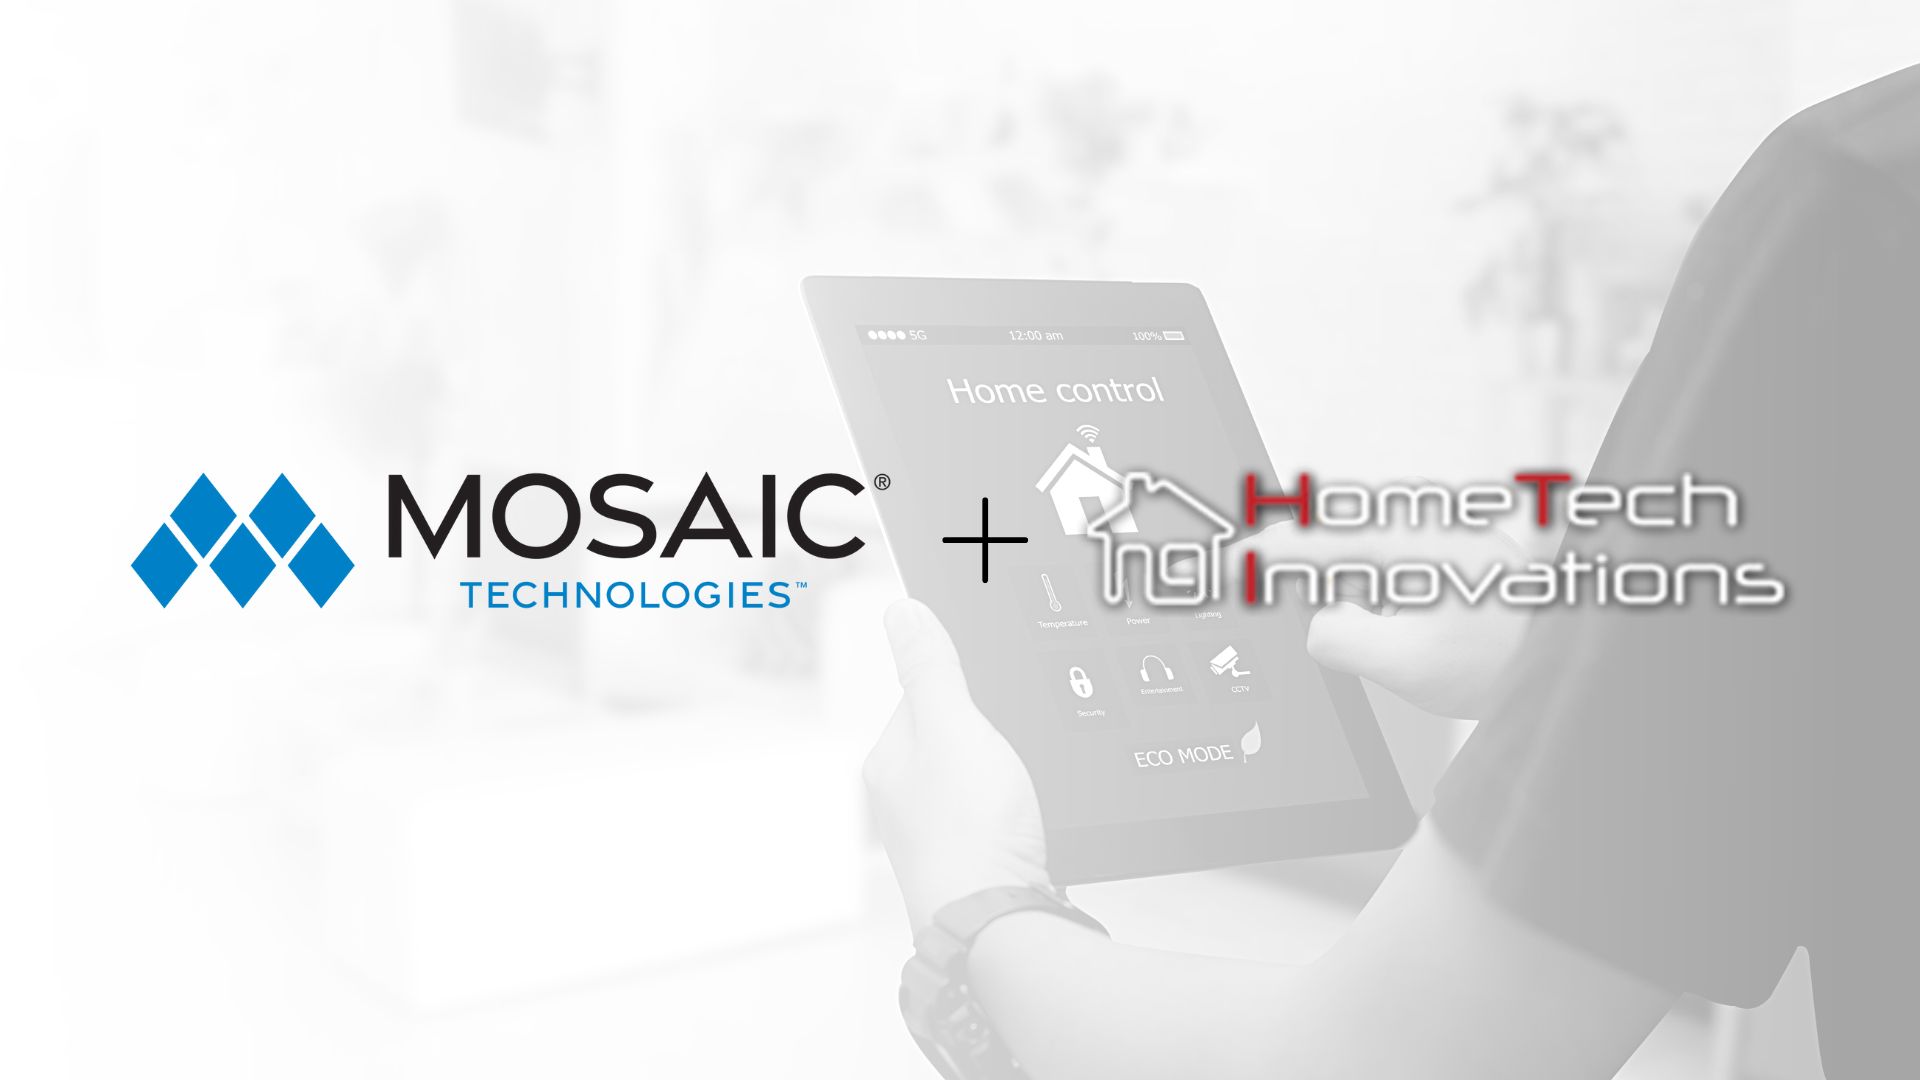 Mosaic Technologies acquires HomeTech Innovations, renamed HomeTech by Mosaic